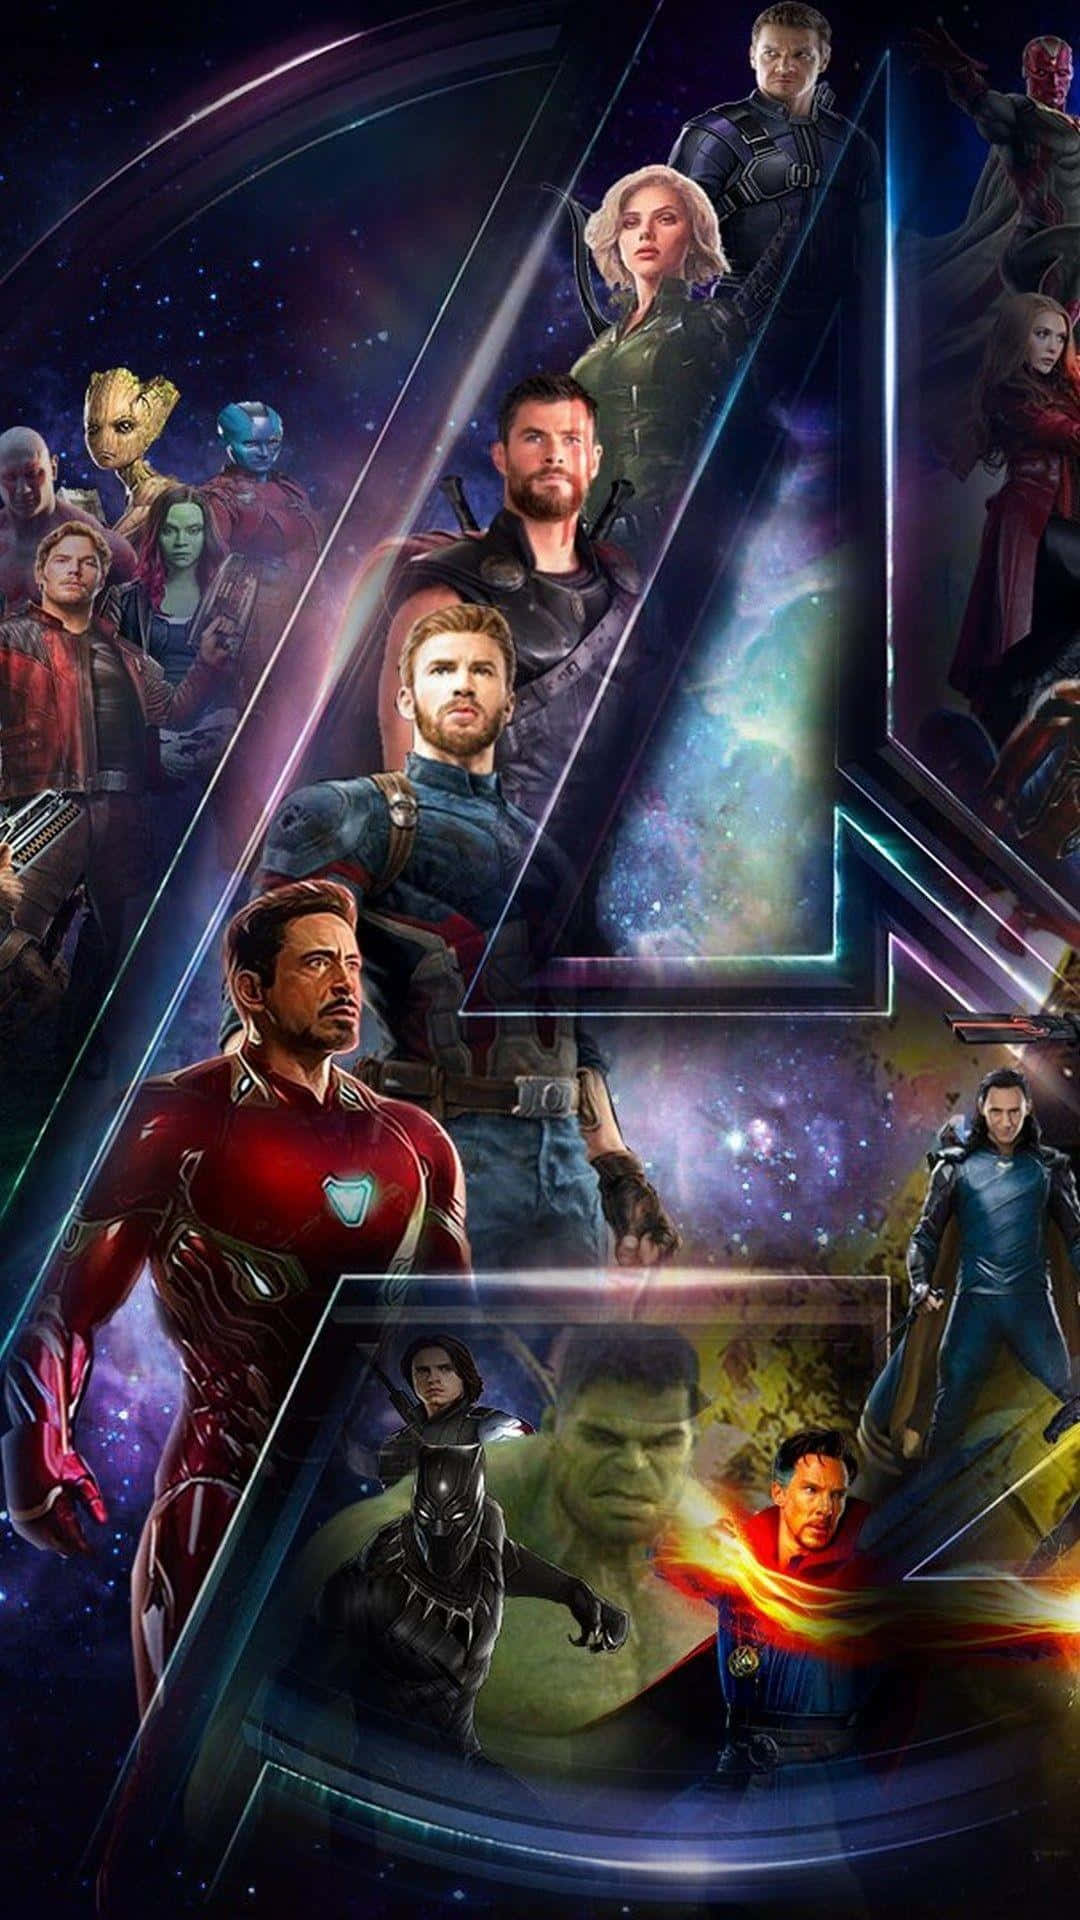 Get your superhero fix with Avengers: Endgame on your iPhone! Wallpaper